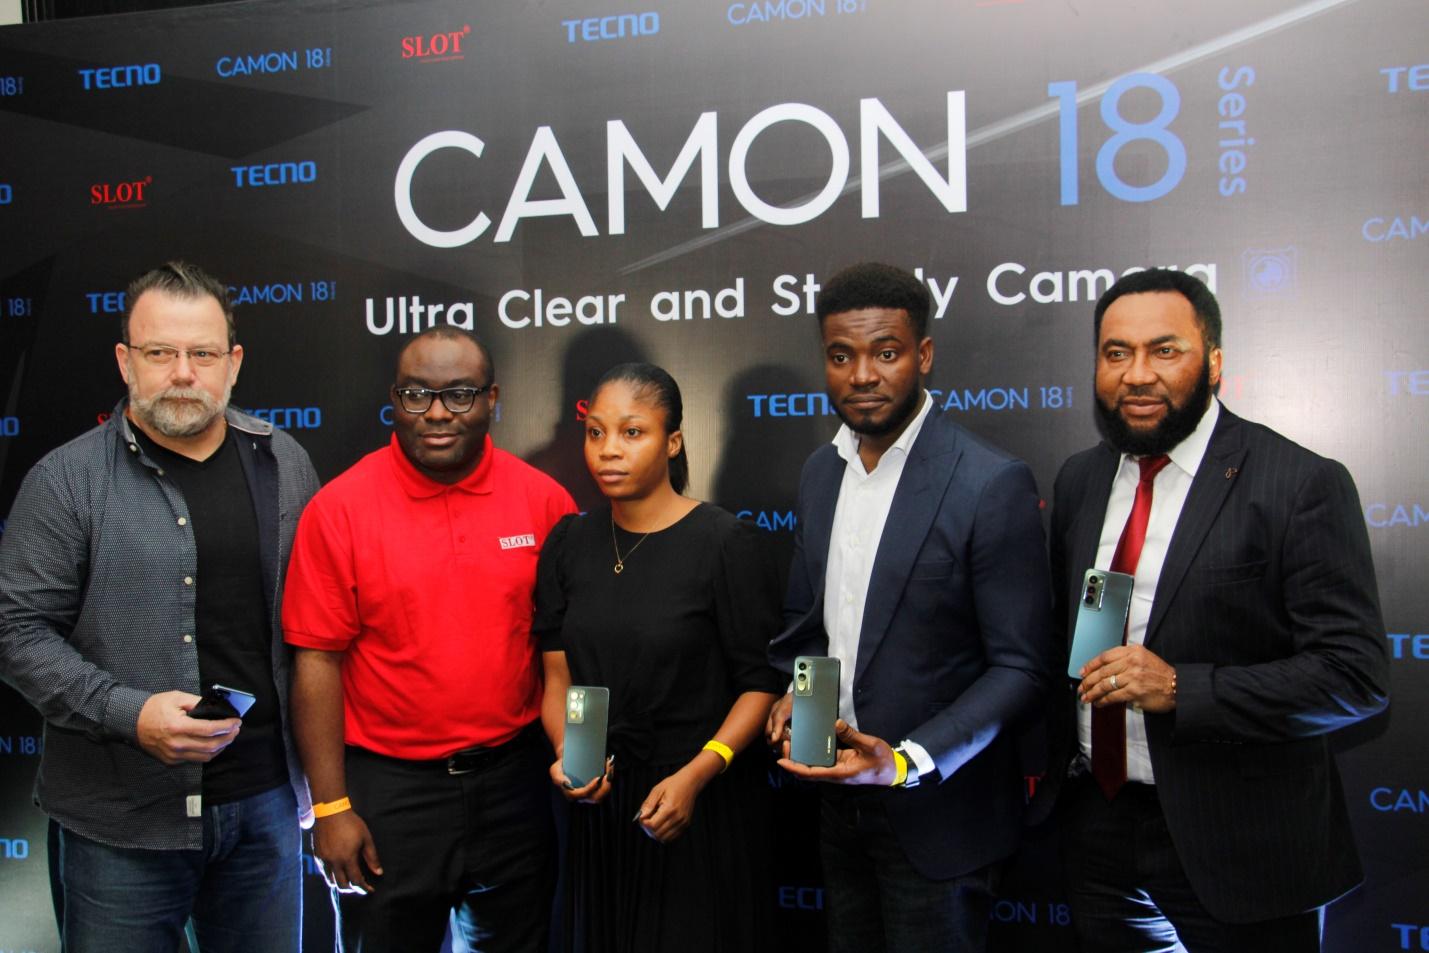 C:\Users\HP\Downloads\CAMON 18 PICTURES\Photostory of the TECNO CAMON 18 LAUNCH.JPG